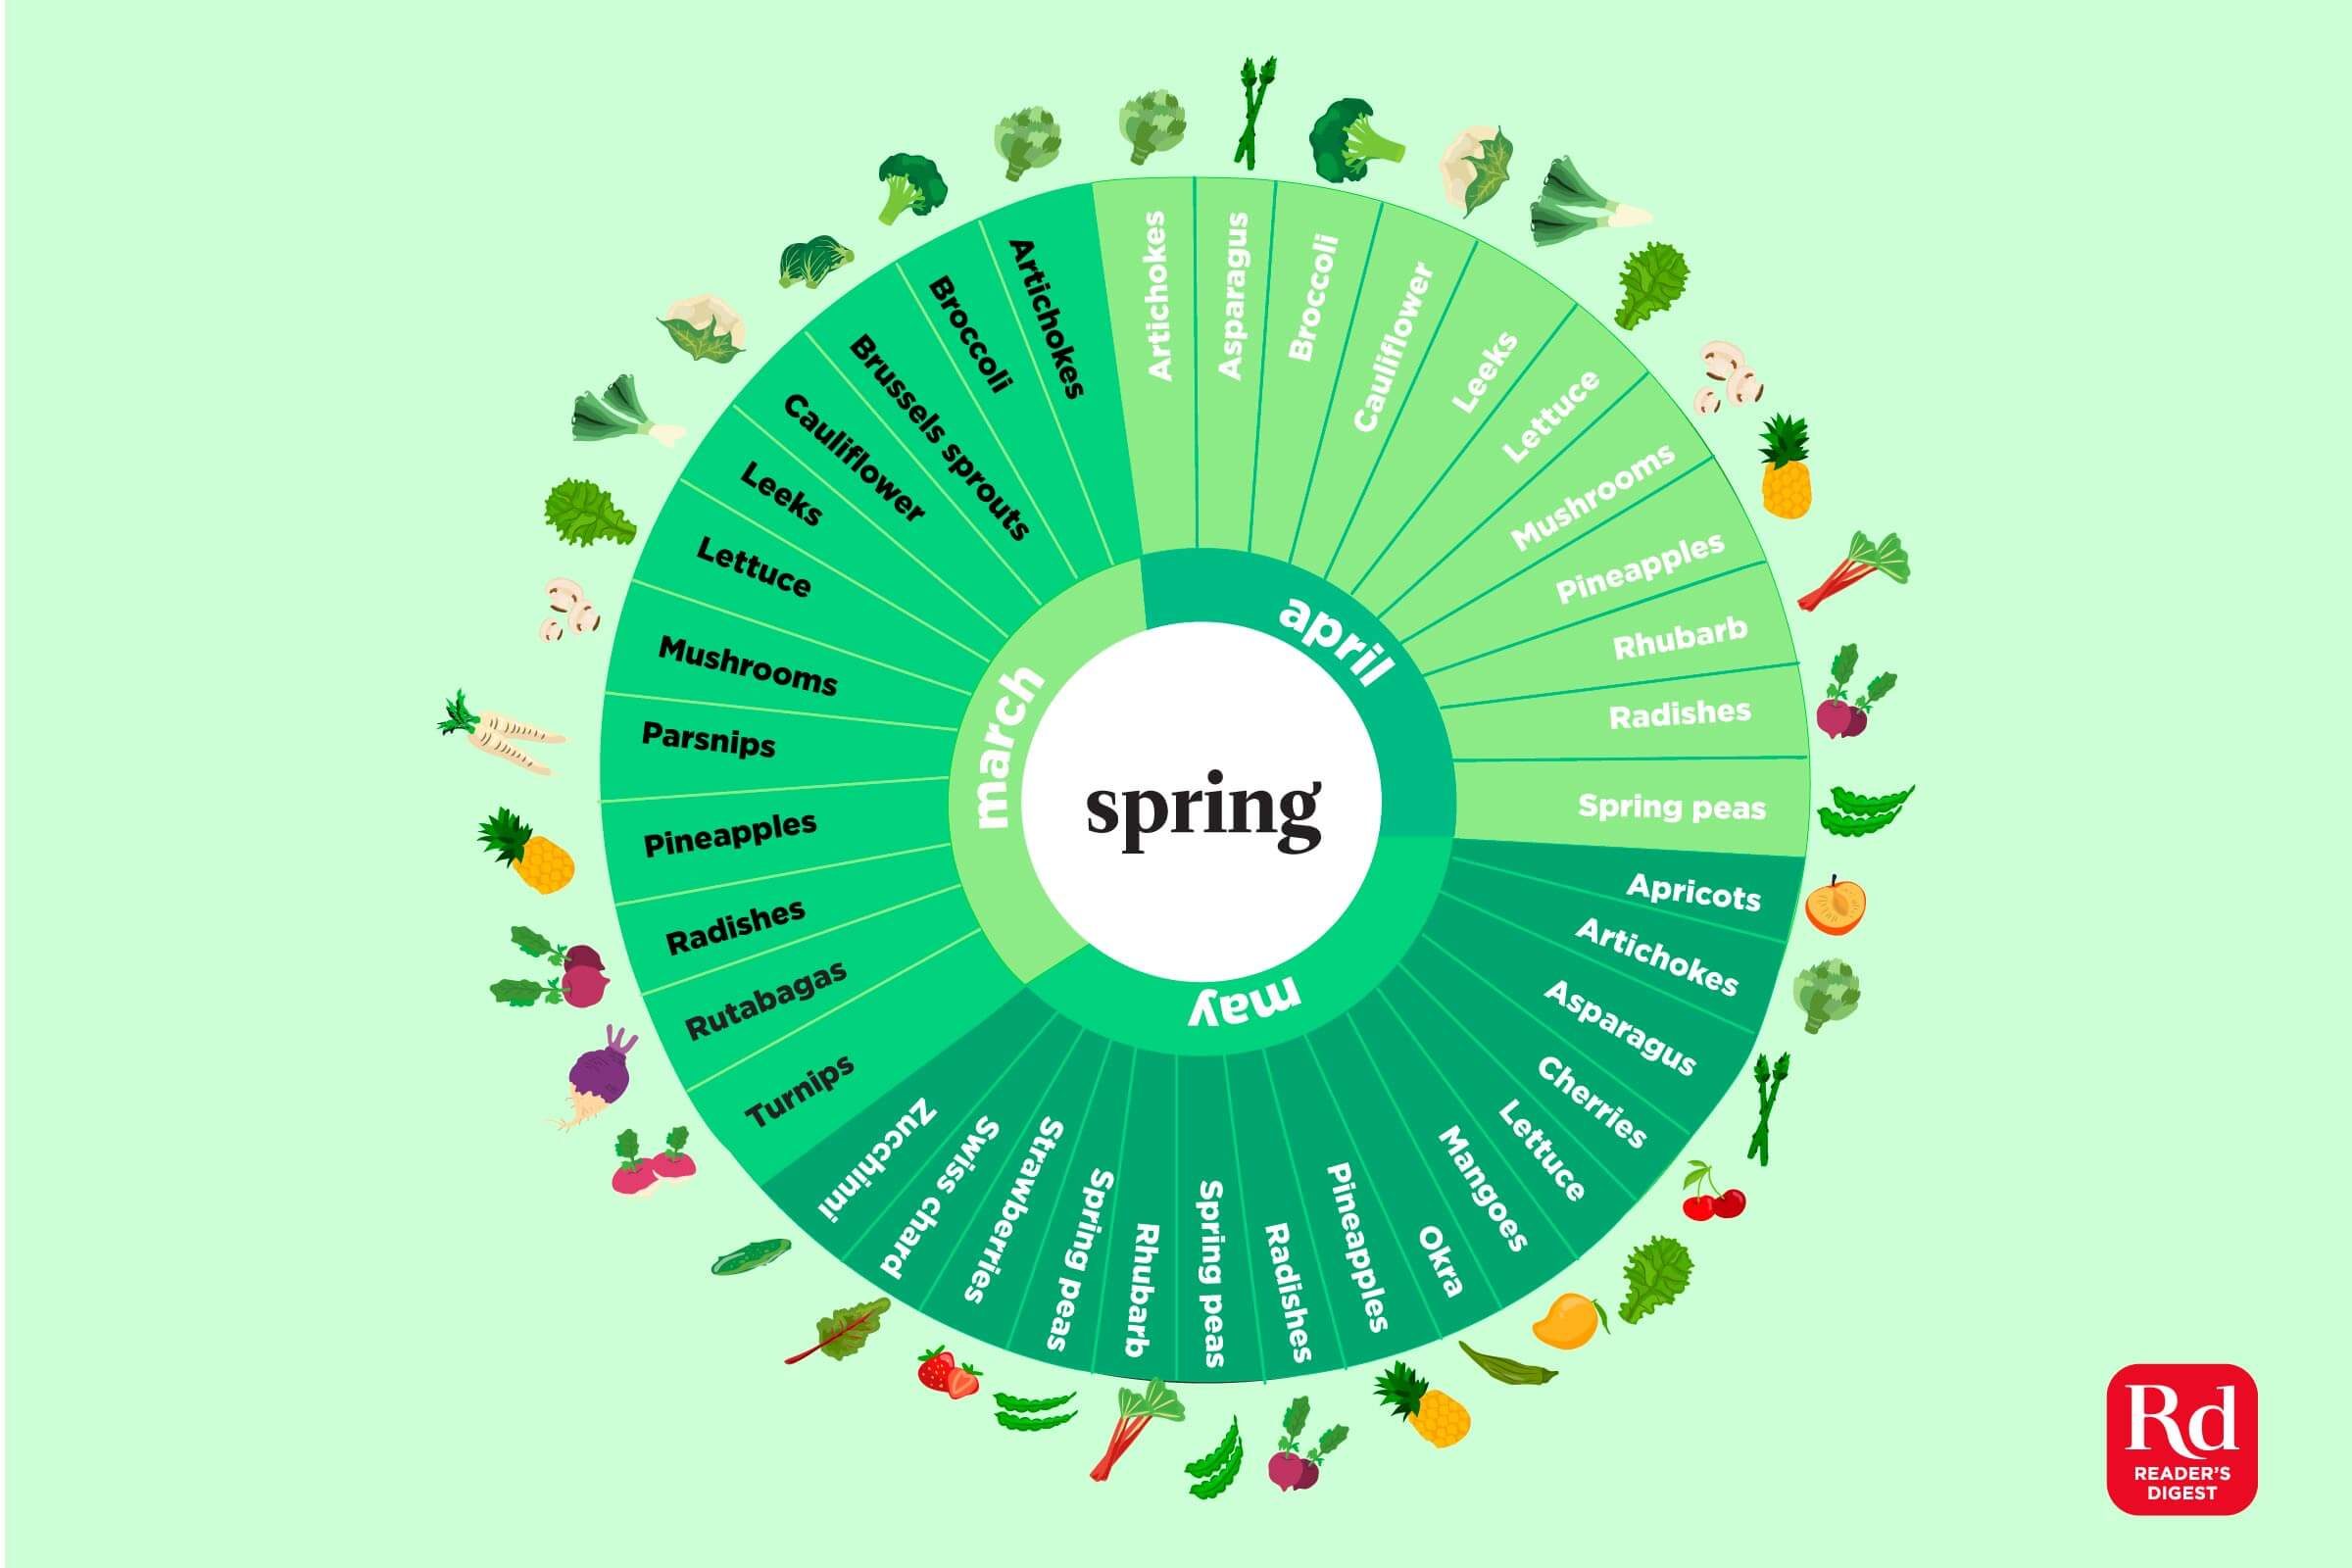 Our Seasonal Produce Guide: Here's When Every Fruit and Vegetable Is Ripe